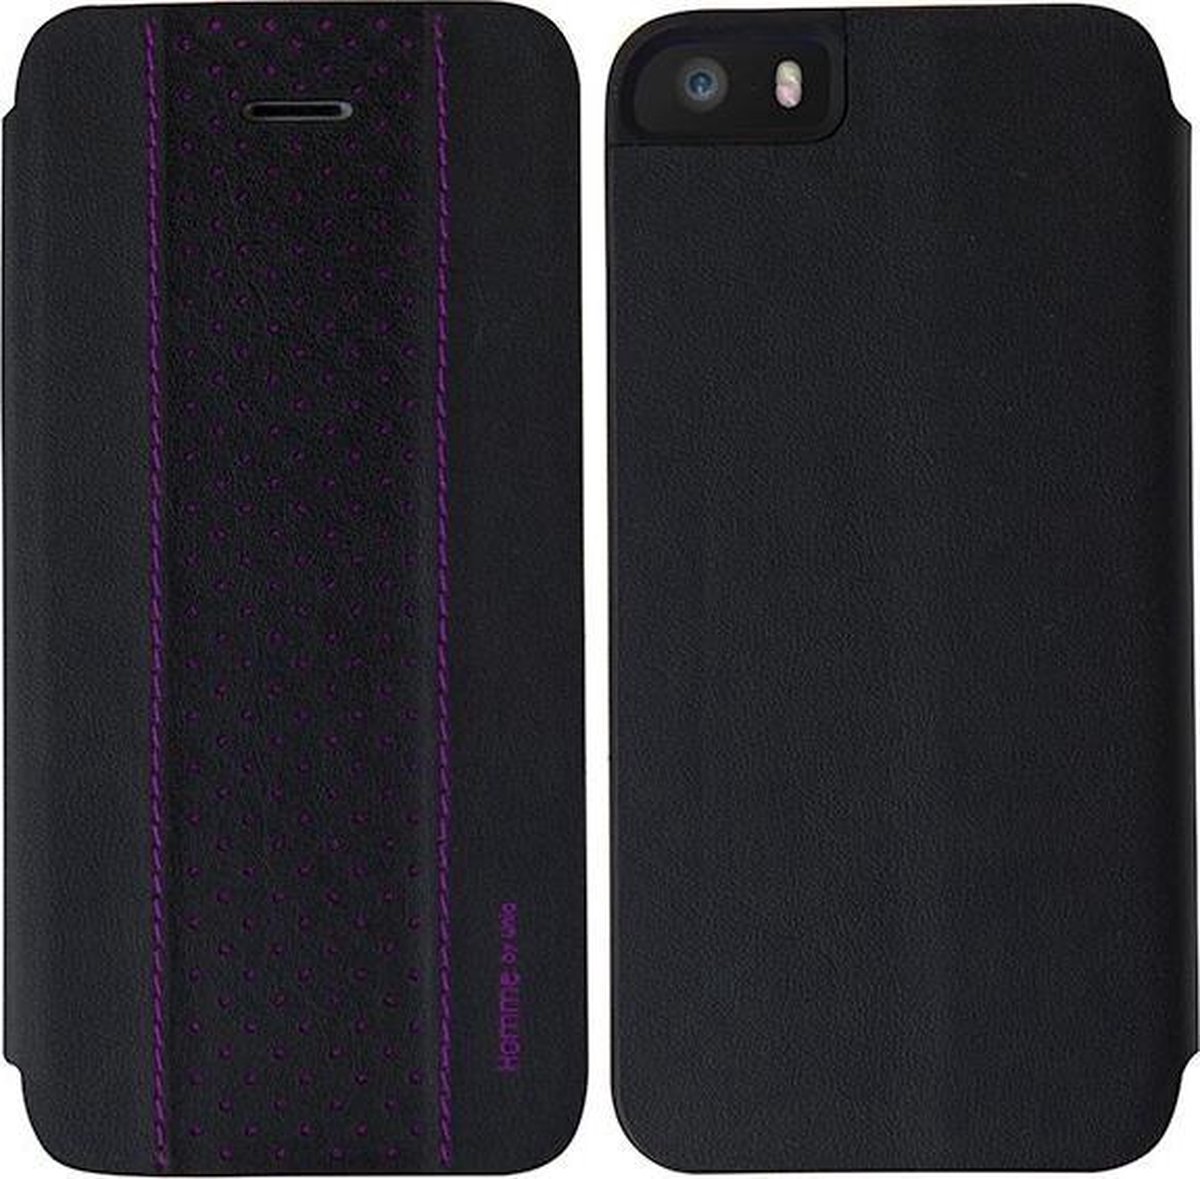 Uniq Homme - Protective cover for mobile phone - purple - for Apple iPhone 5, 5s